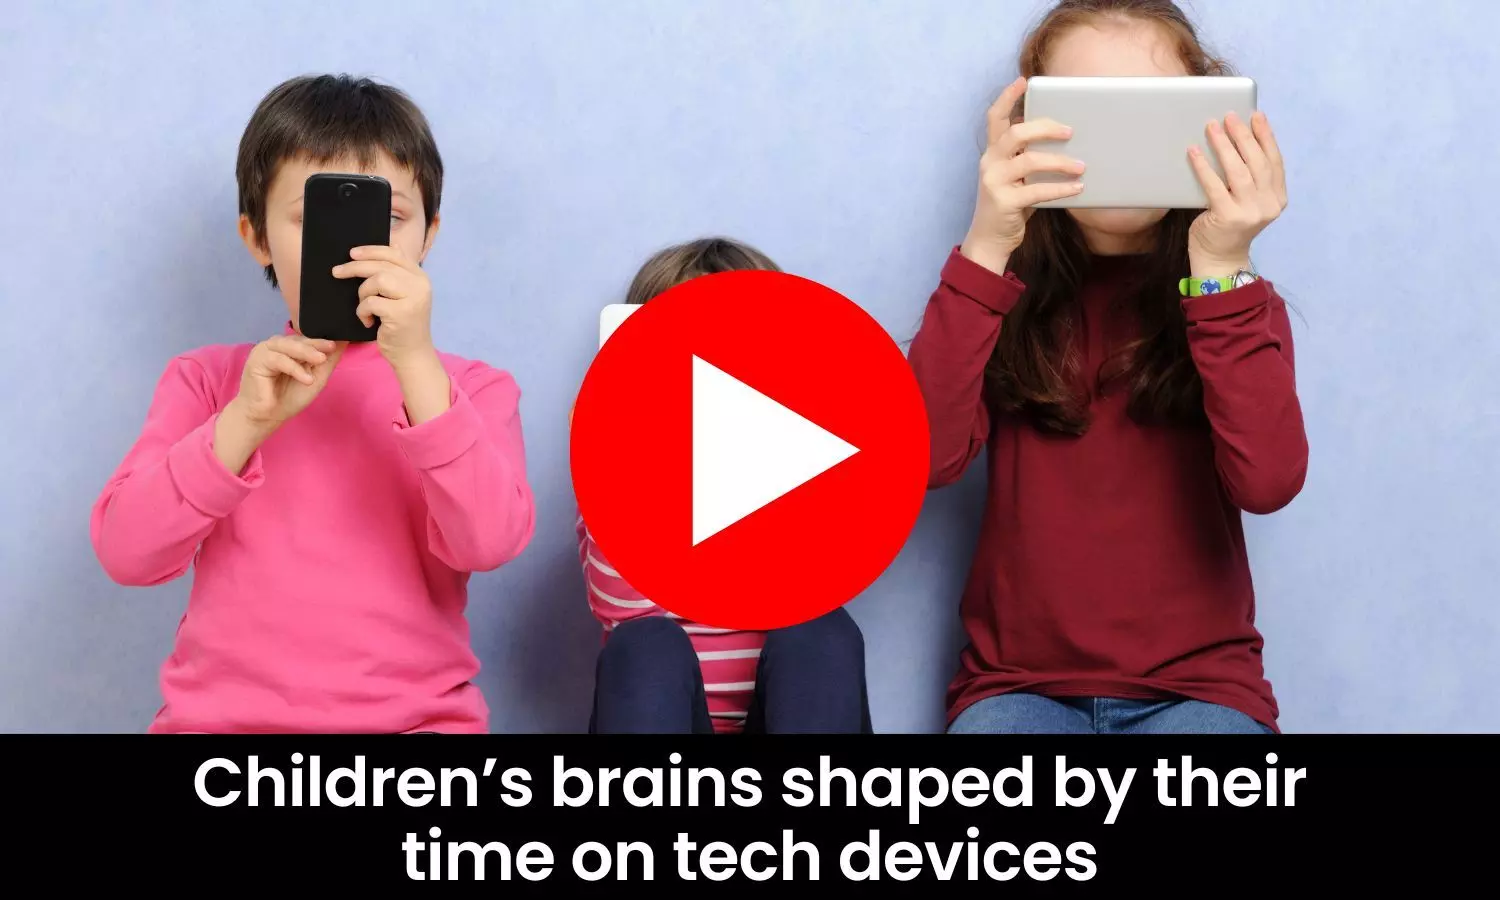 Childrens brains shaped by their time on tech devices